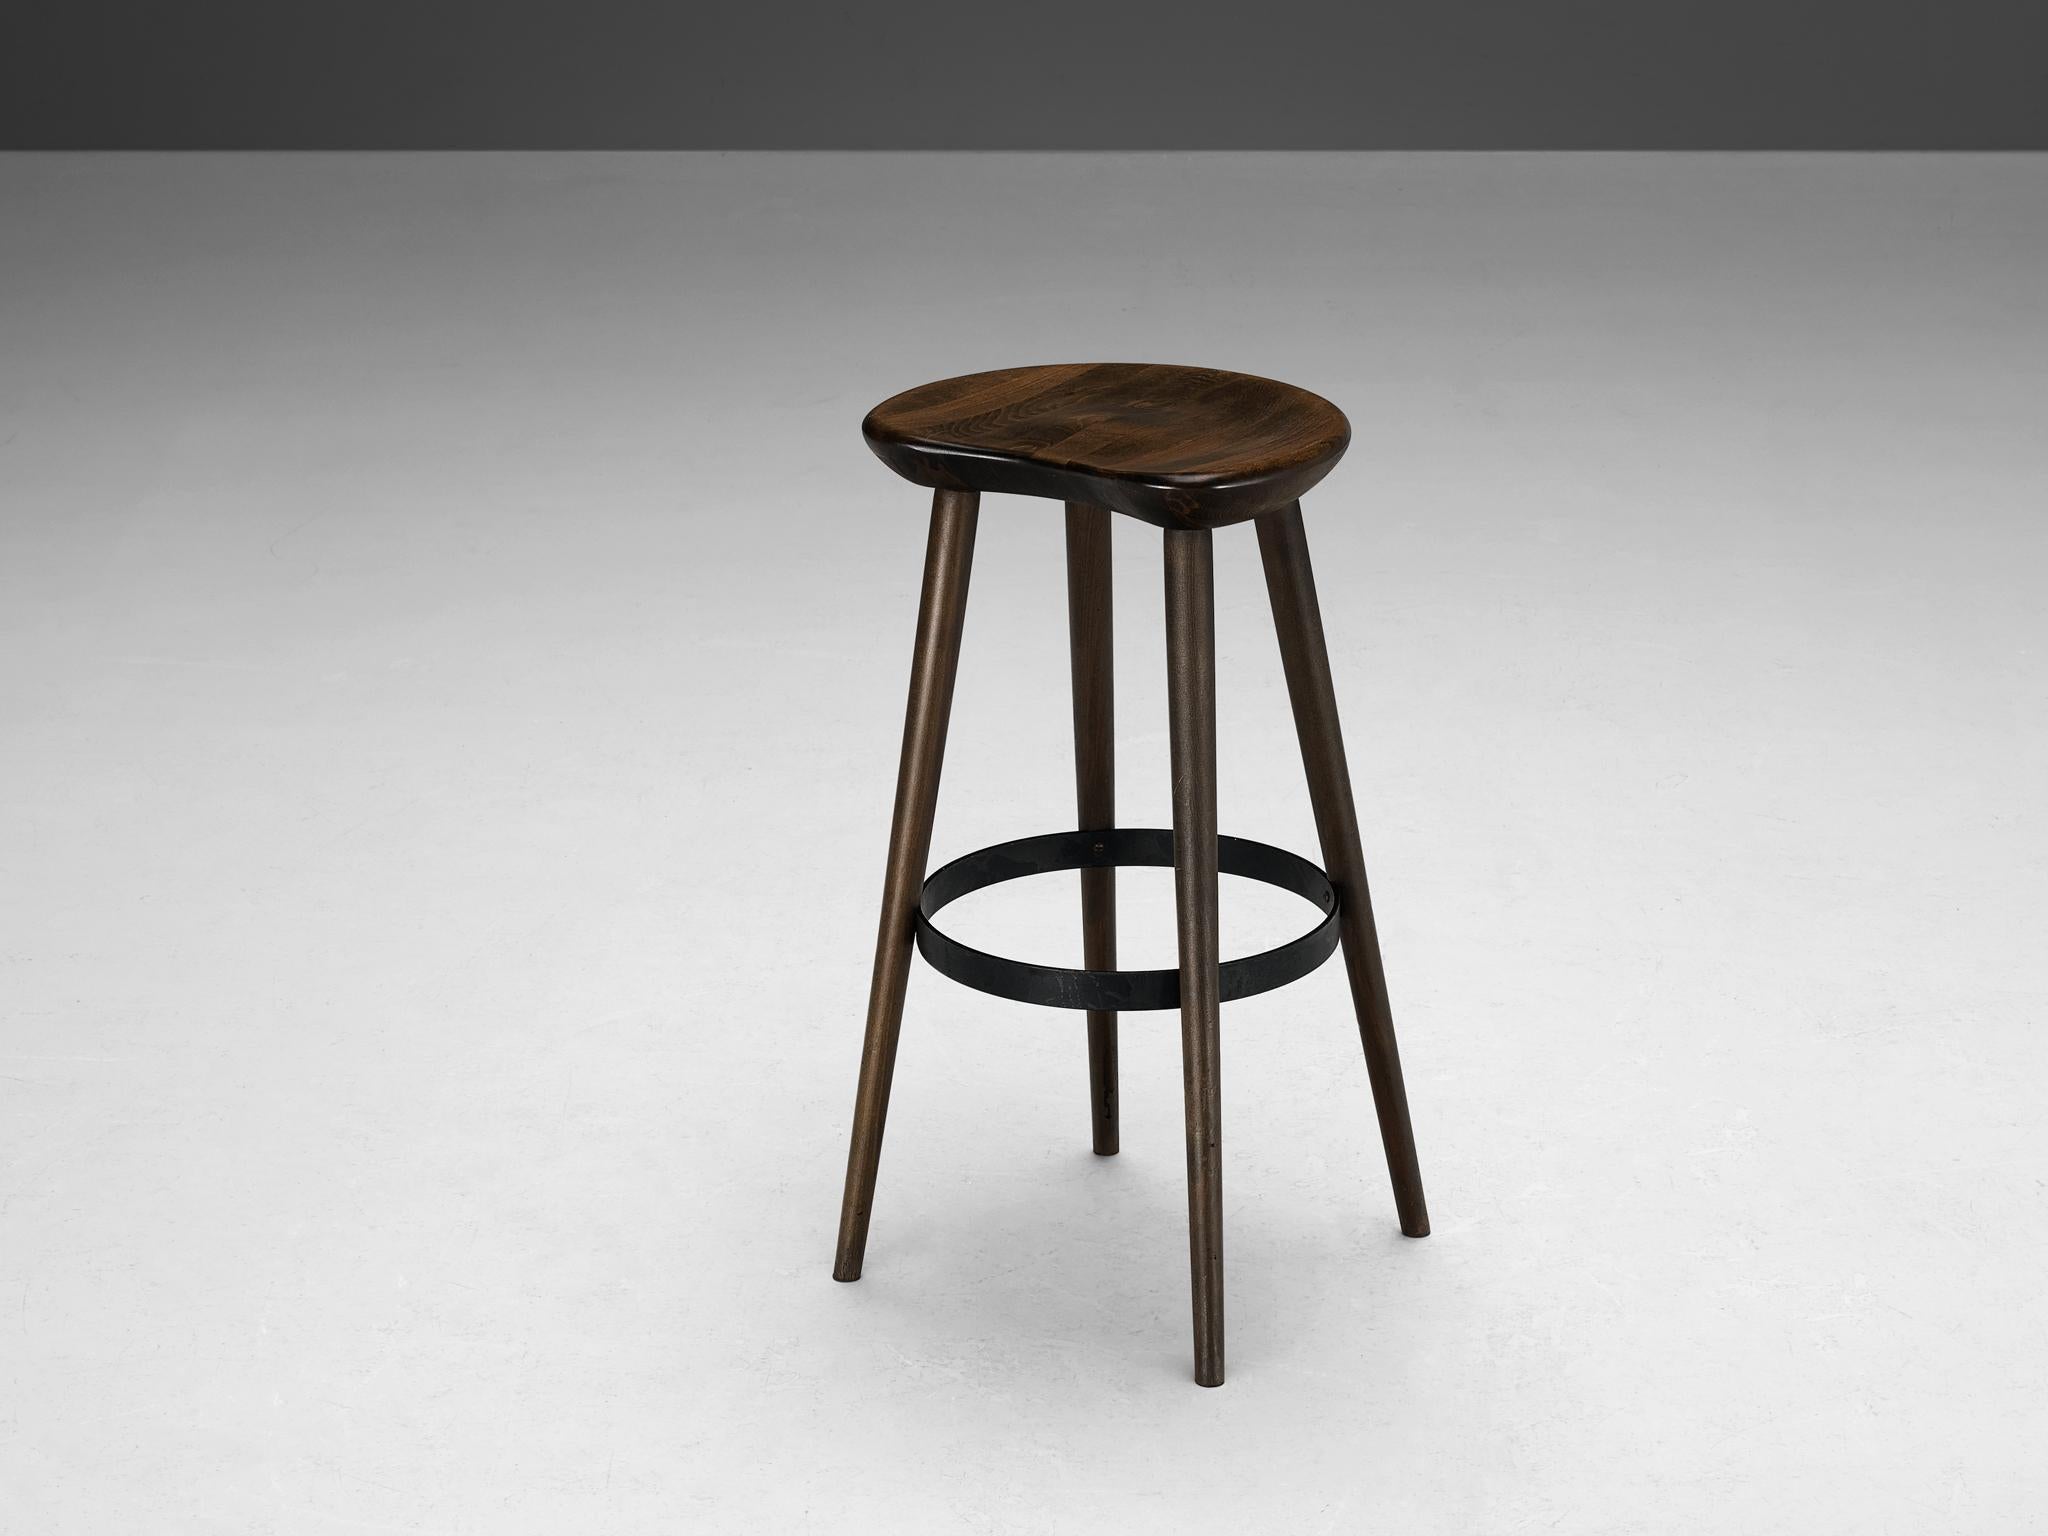 Late 20th Century Brutalist Bar Stools in Darkened Wood and Steel Detailing  For Sale